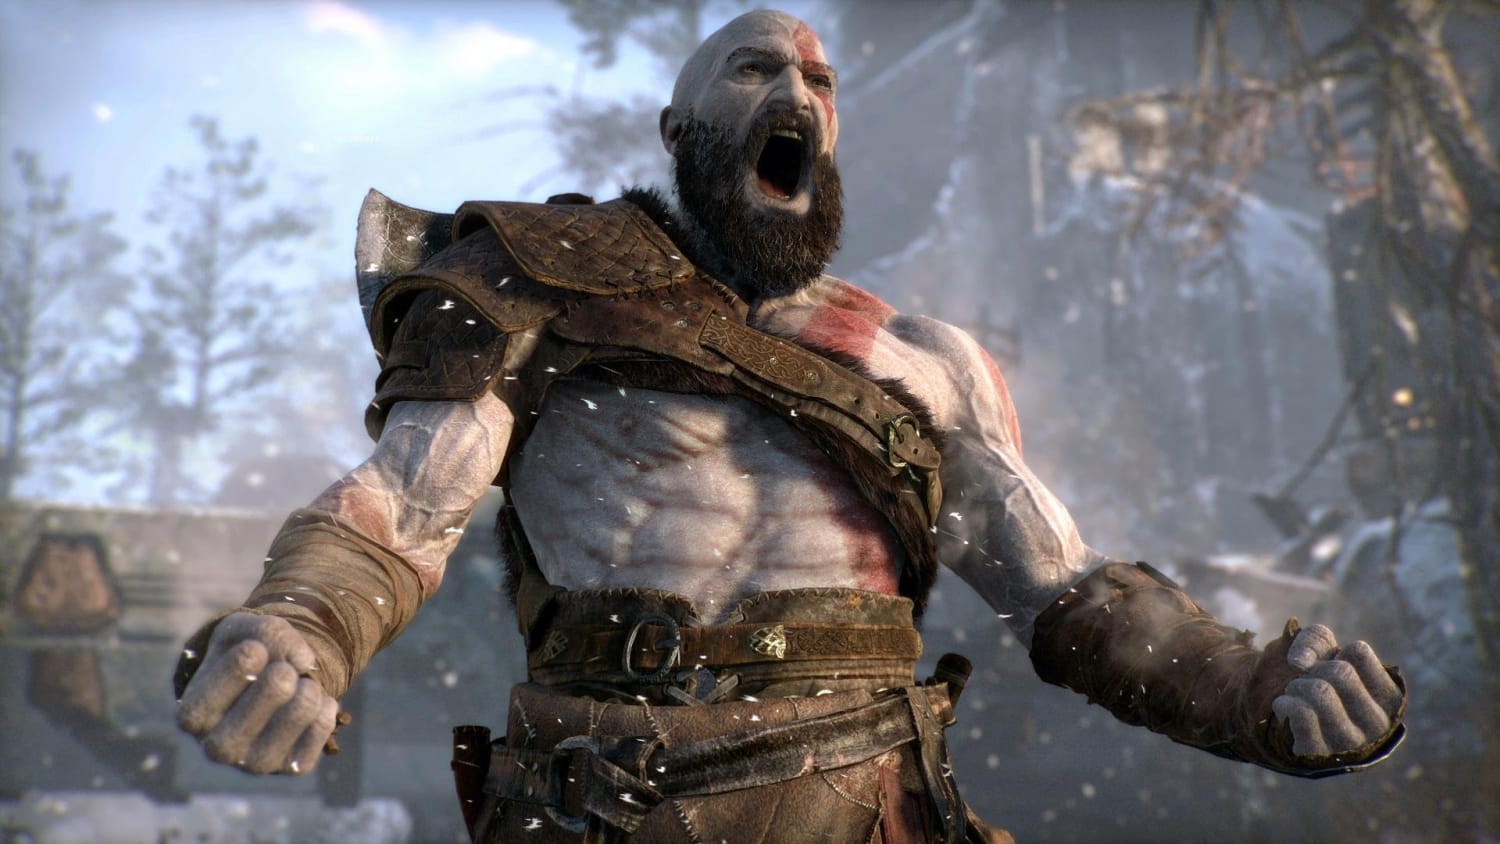 God of War PC releases soon with new improvements, system requirements -  all you need to know